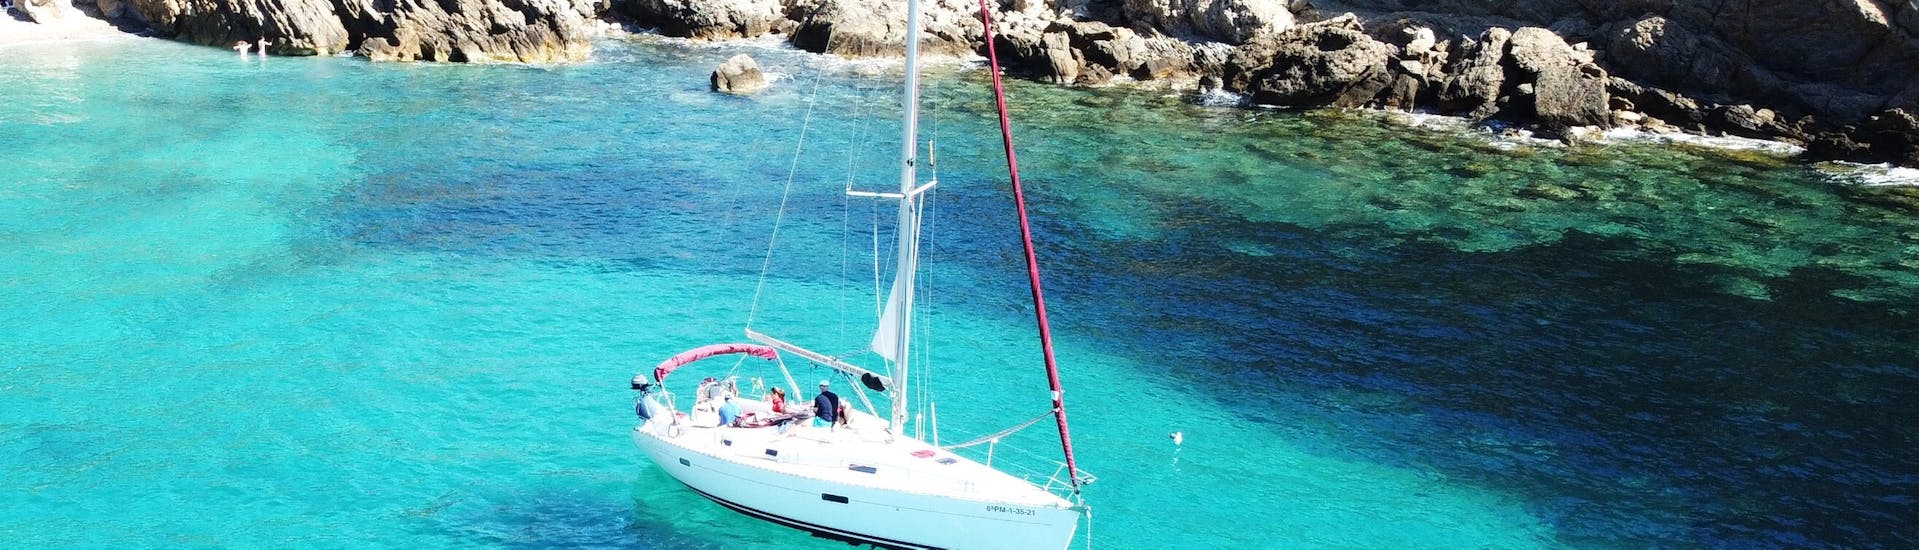 Our boat is navigating on the water during the Private Full-Day Boat Trip in Mallorca from Port d'Andratx with Pura Vida Sailing Mallorca.